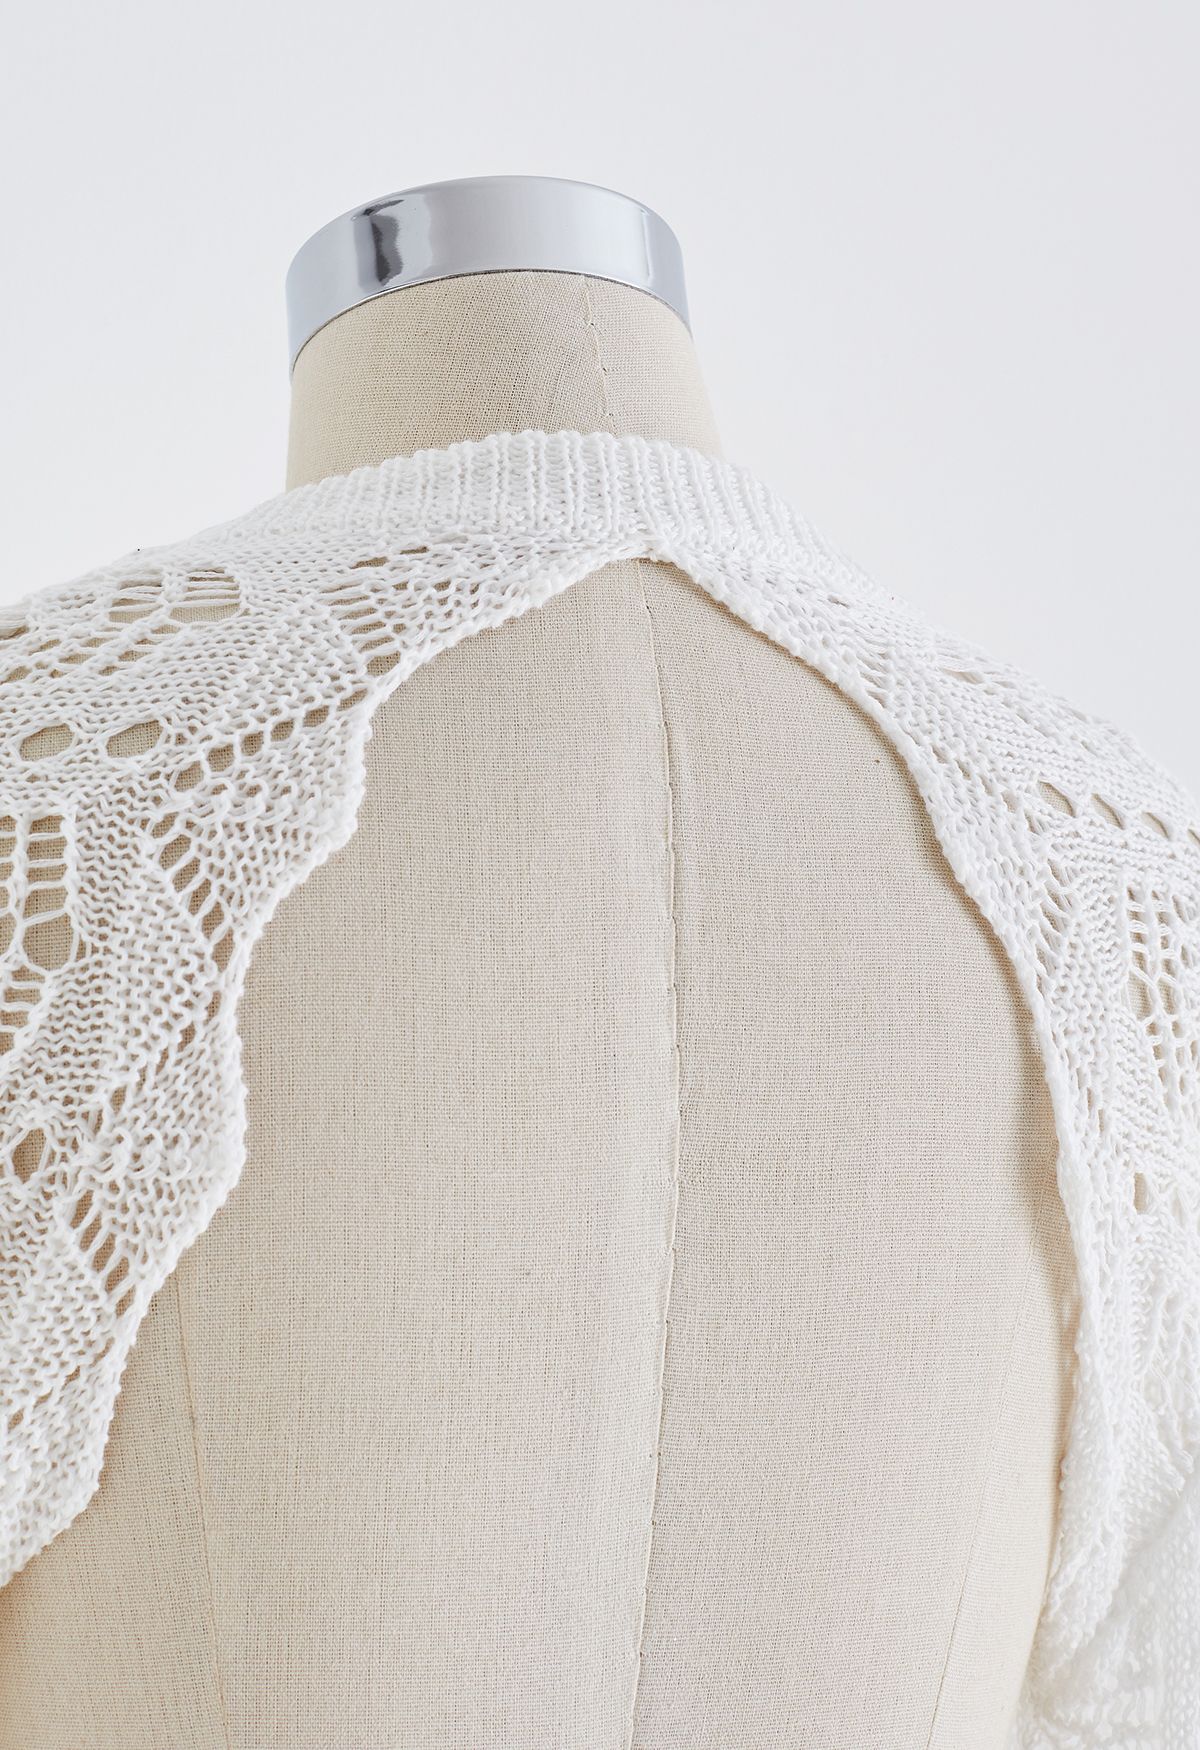 Open Back Hollow Out Knit Cover Up in White